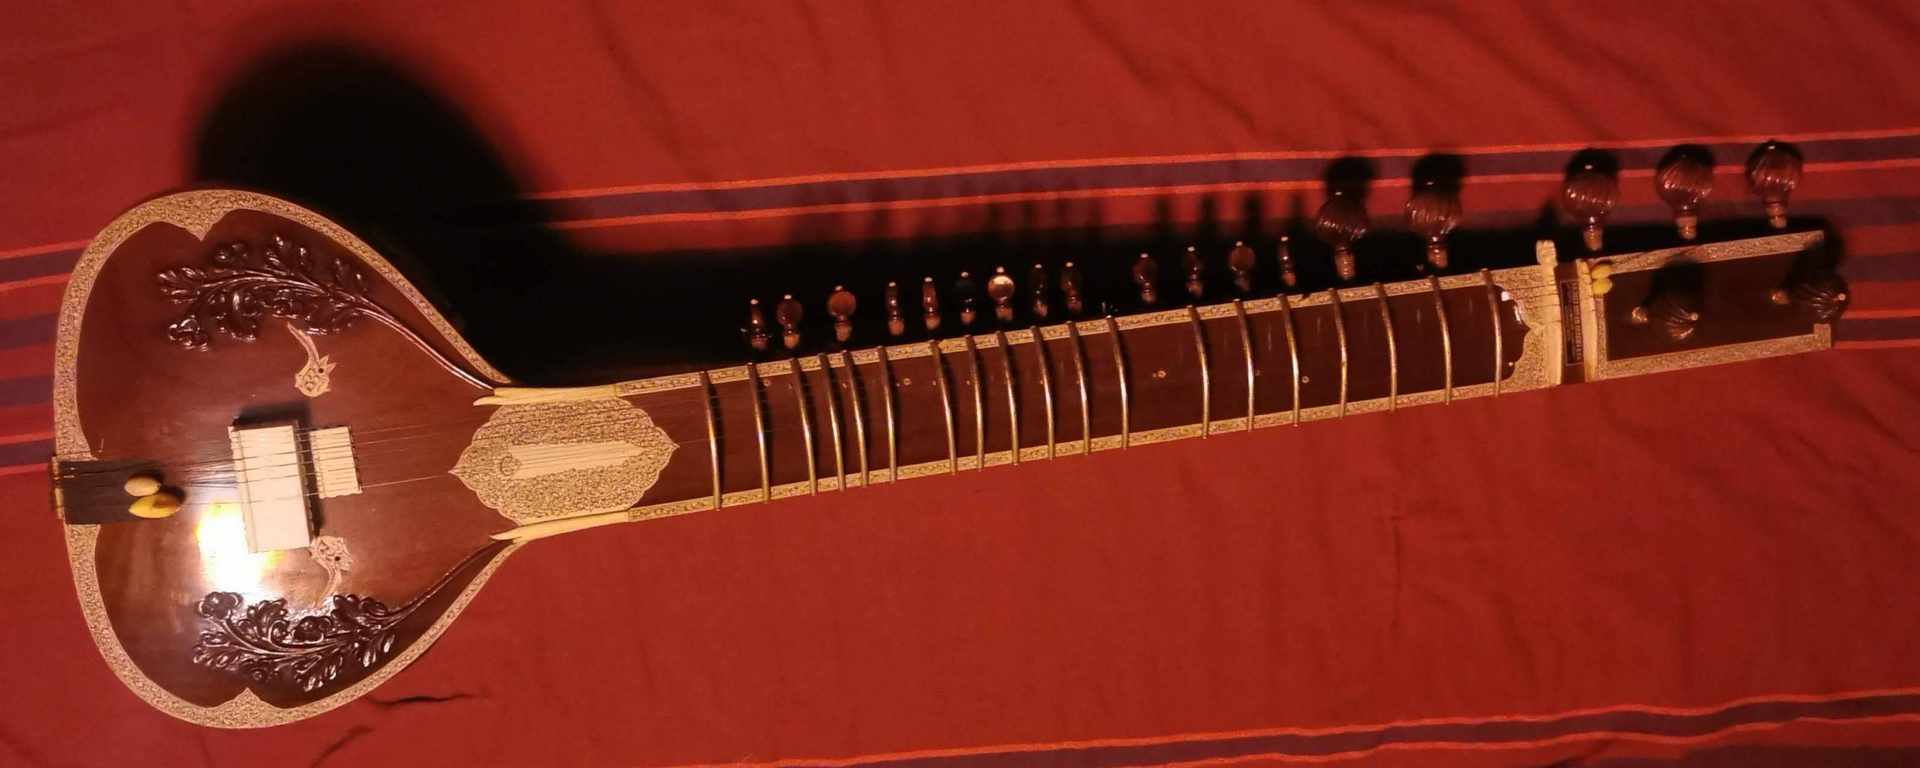 ONLINE Sitar lessons and Raaga